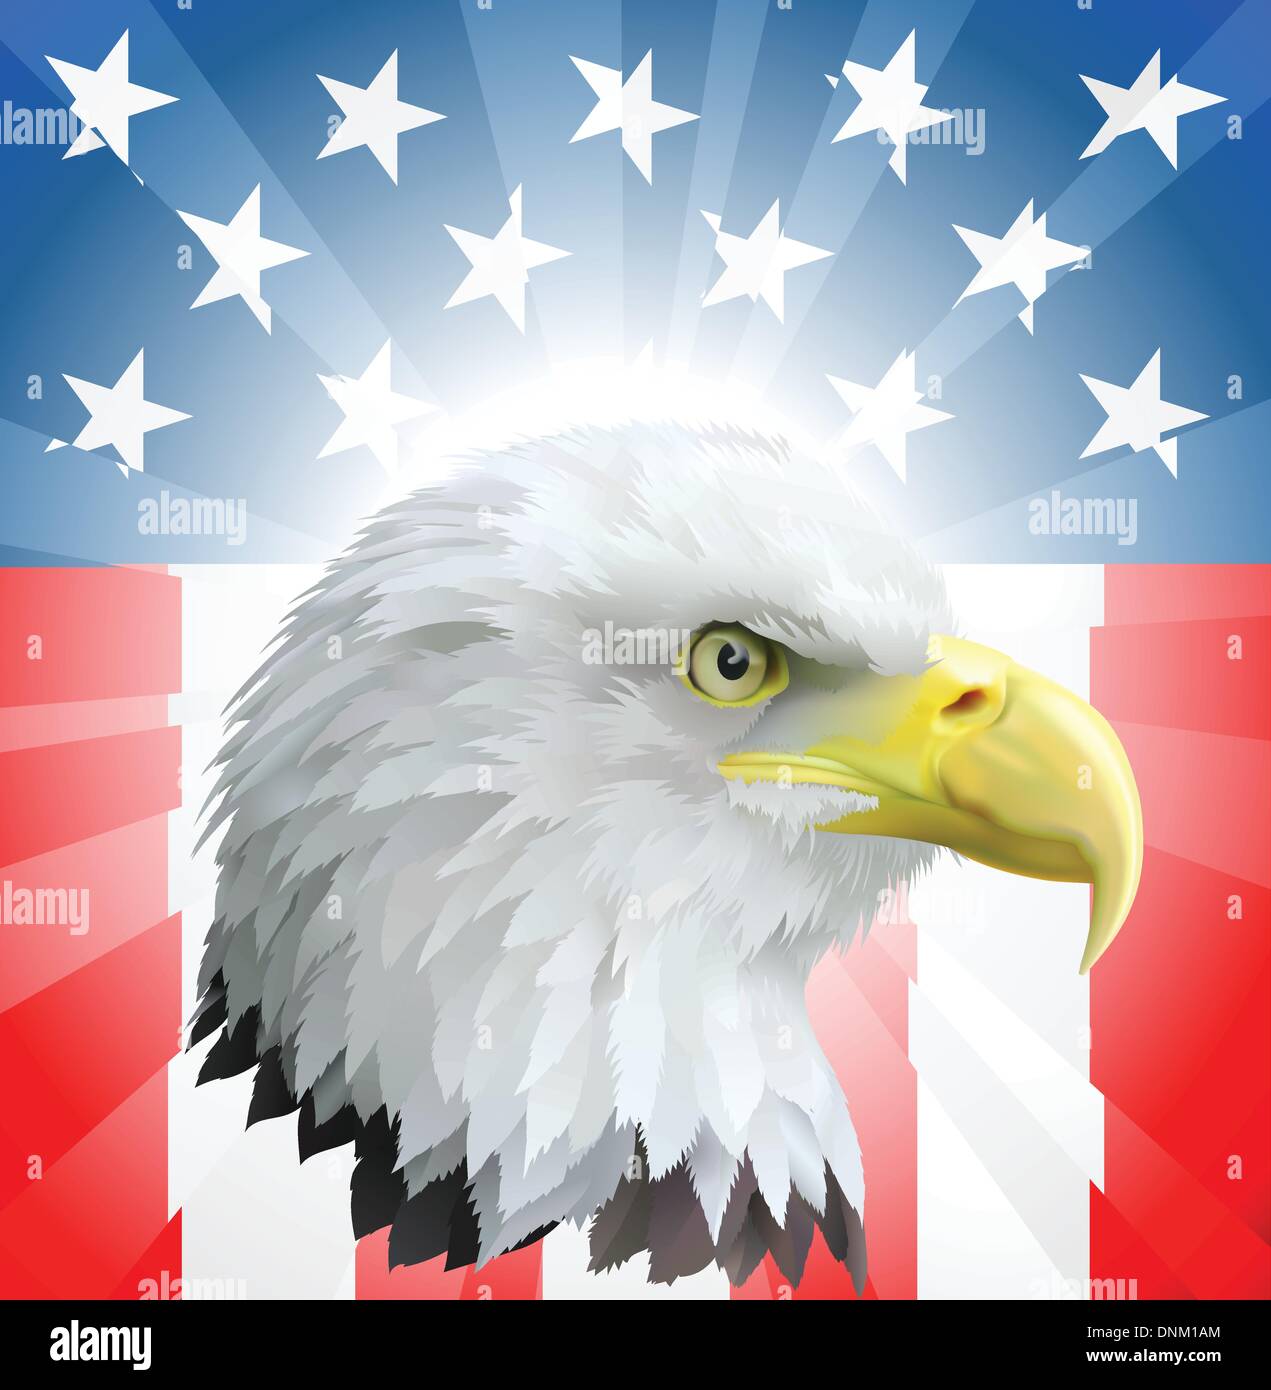 A background featuring American eagle and stars and stripes background Stock Vector